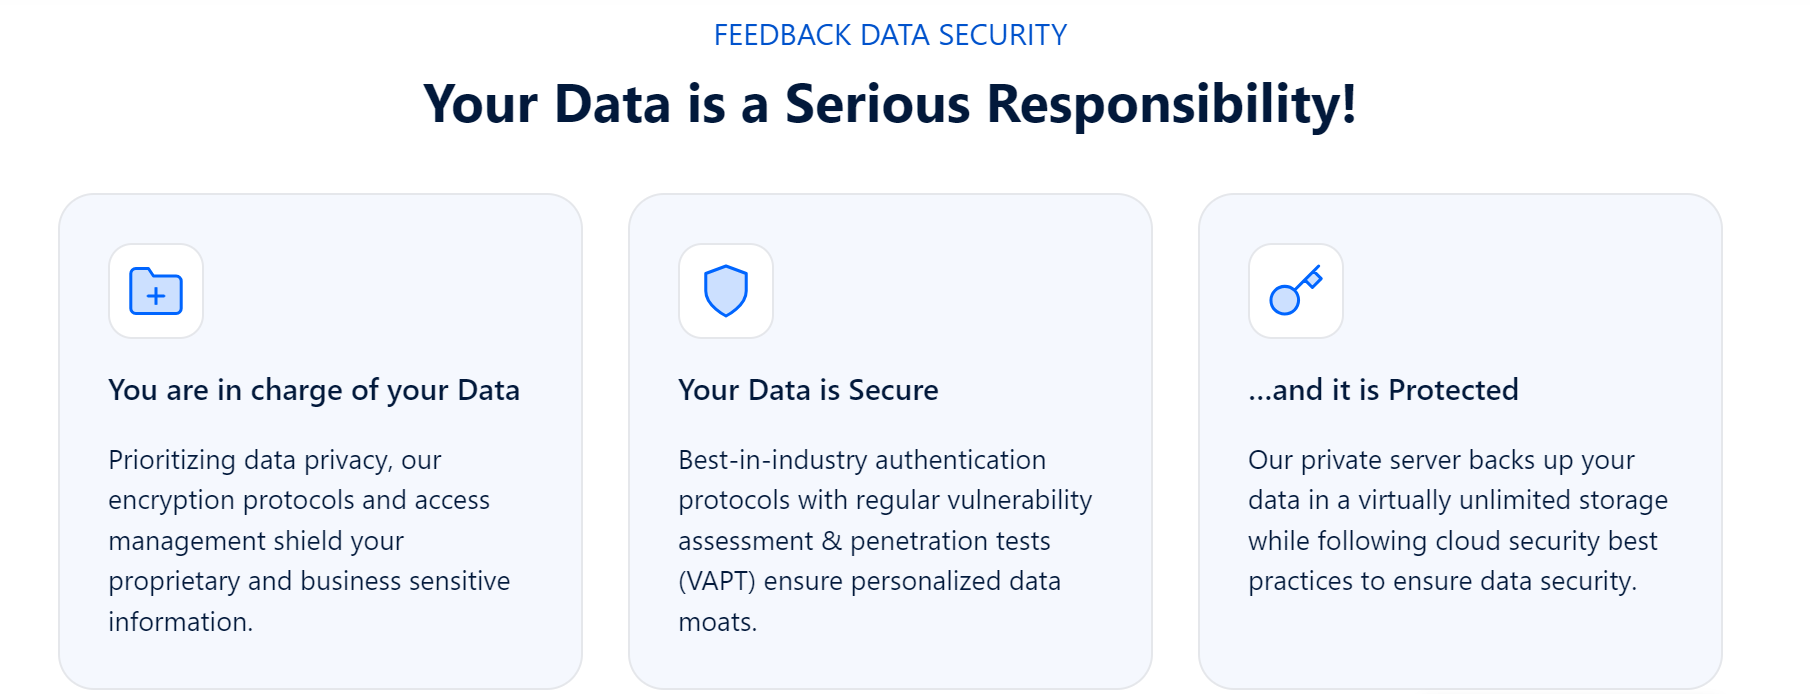 The image shows how SurveySensum keeps clients and users’ data safe, secure, and protected.